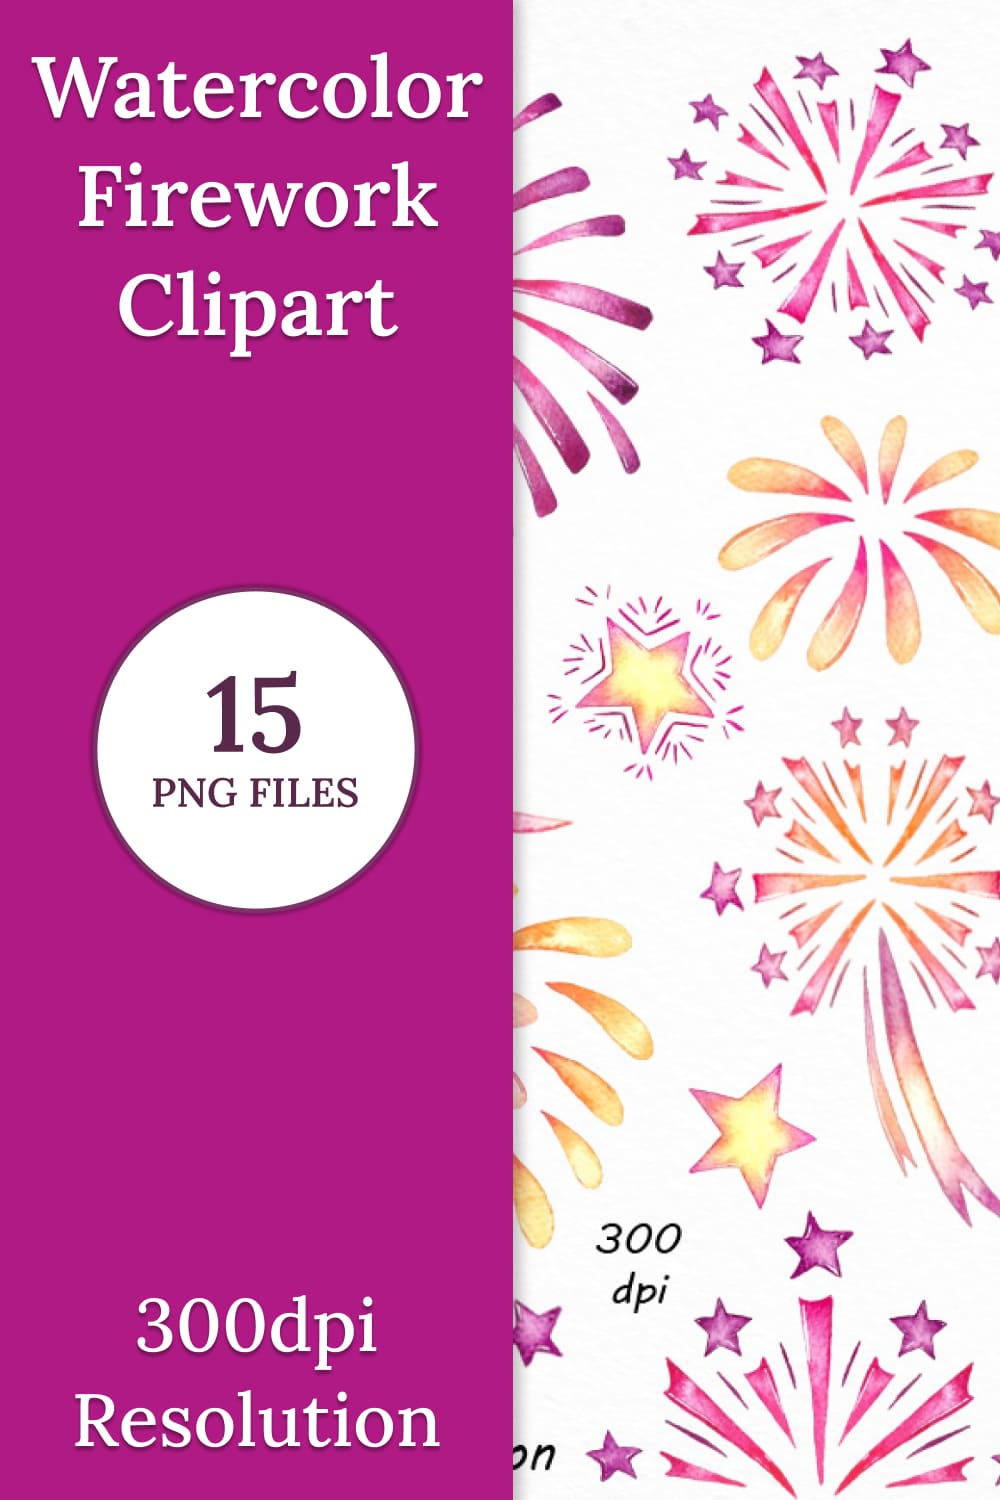 Watercolor Firework Clipart - pinterest image preview.